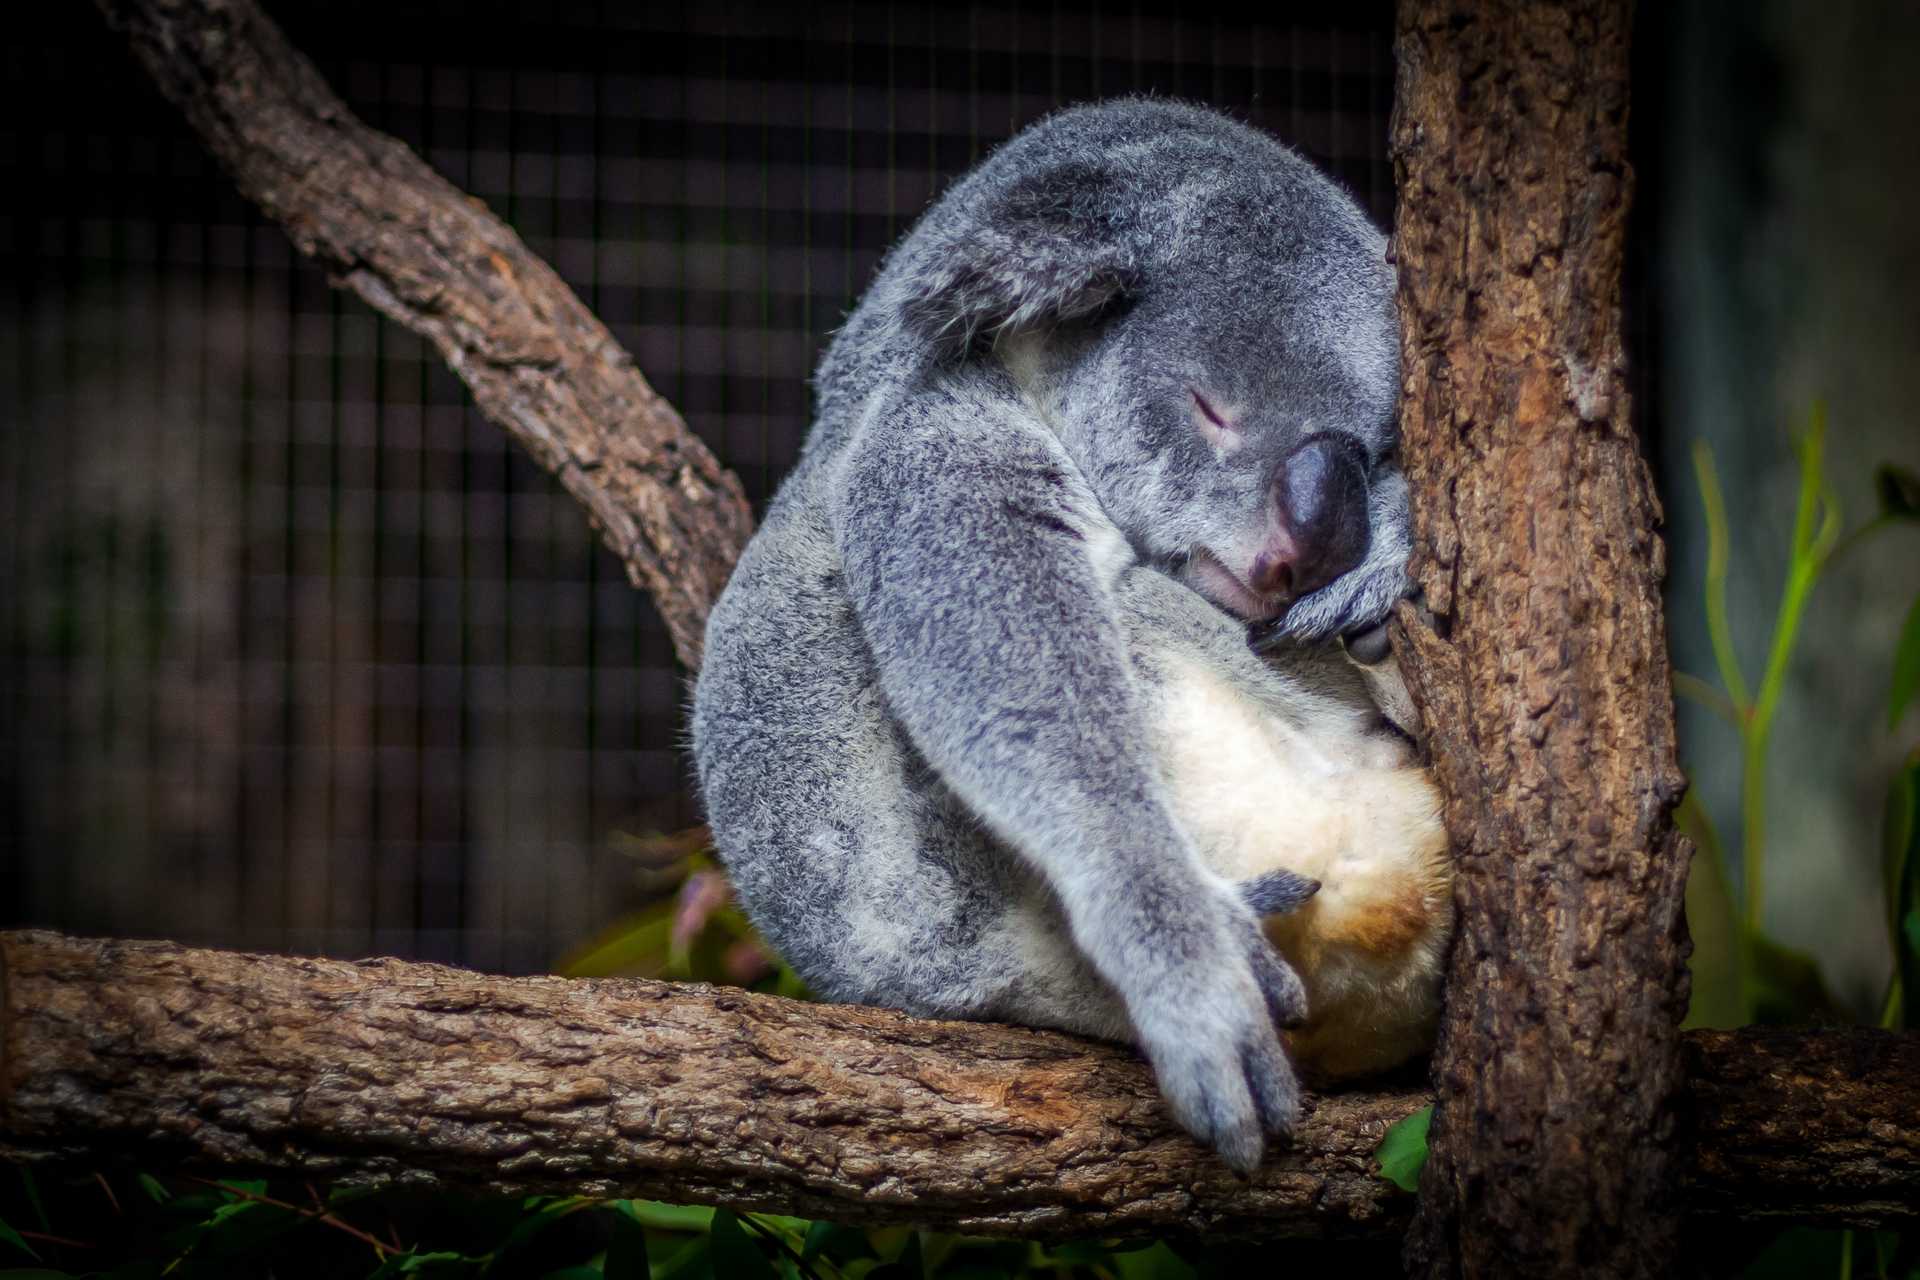 An exhausted koala resting in a tree